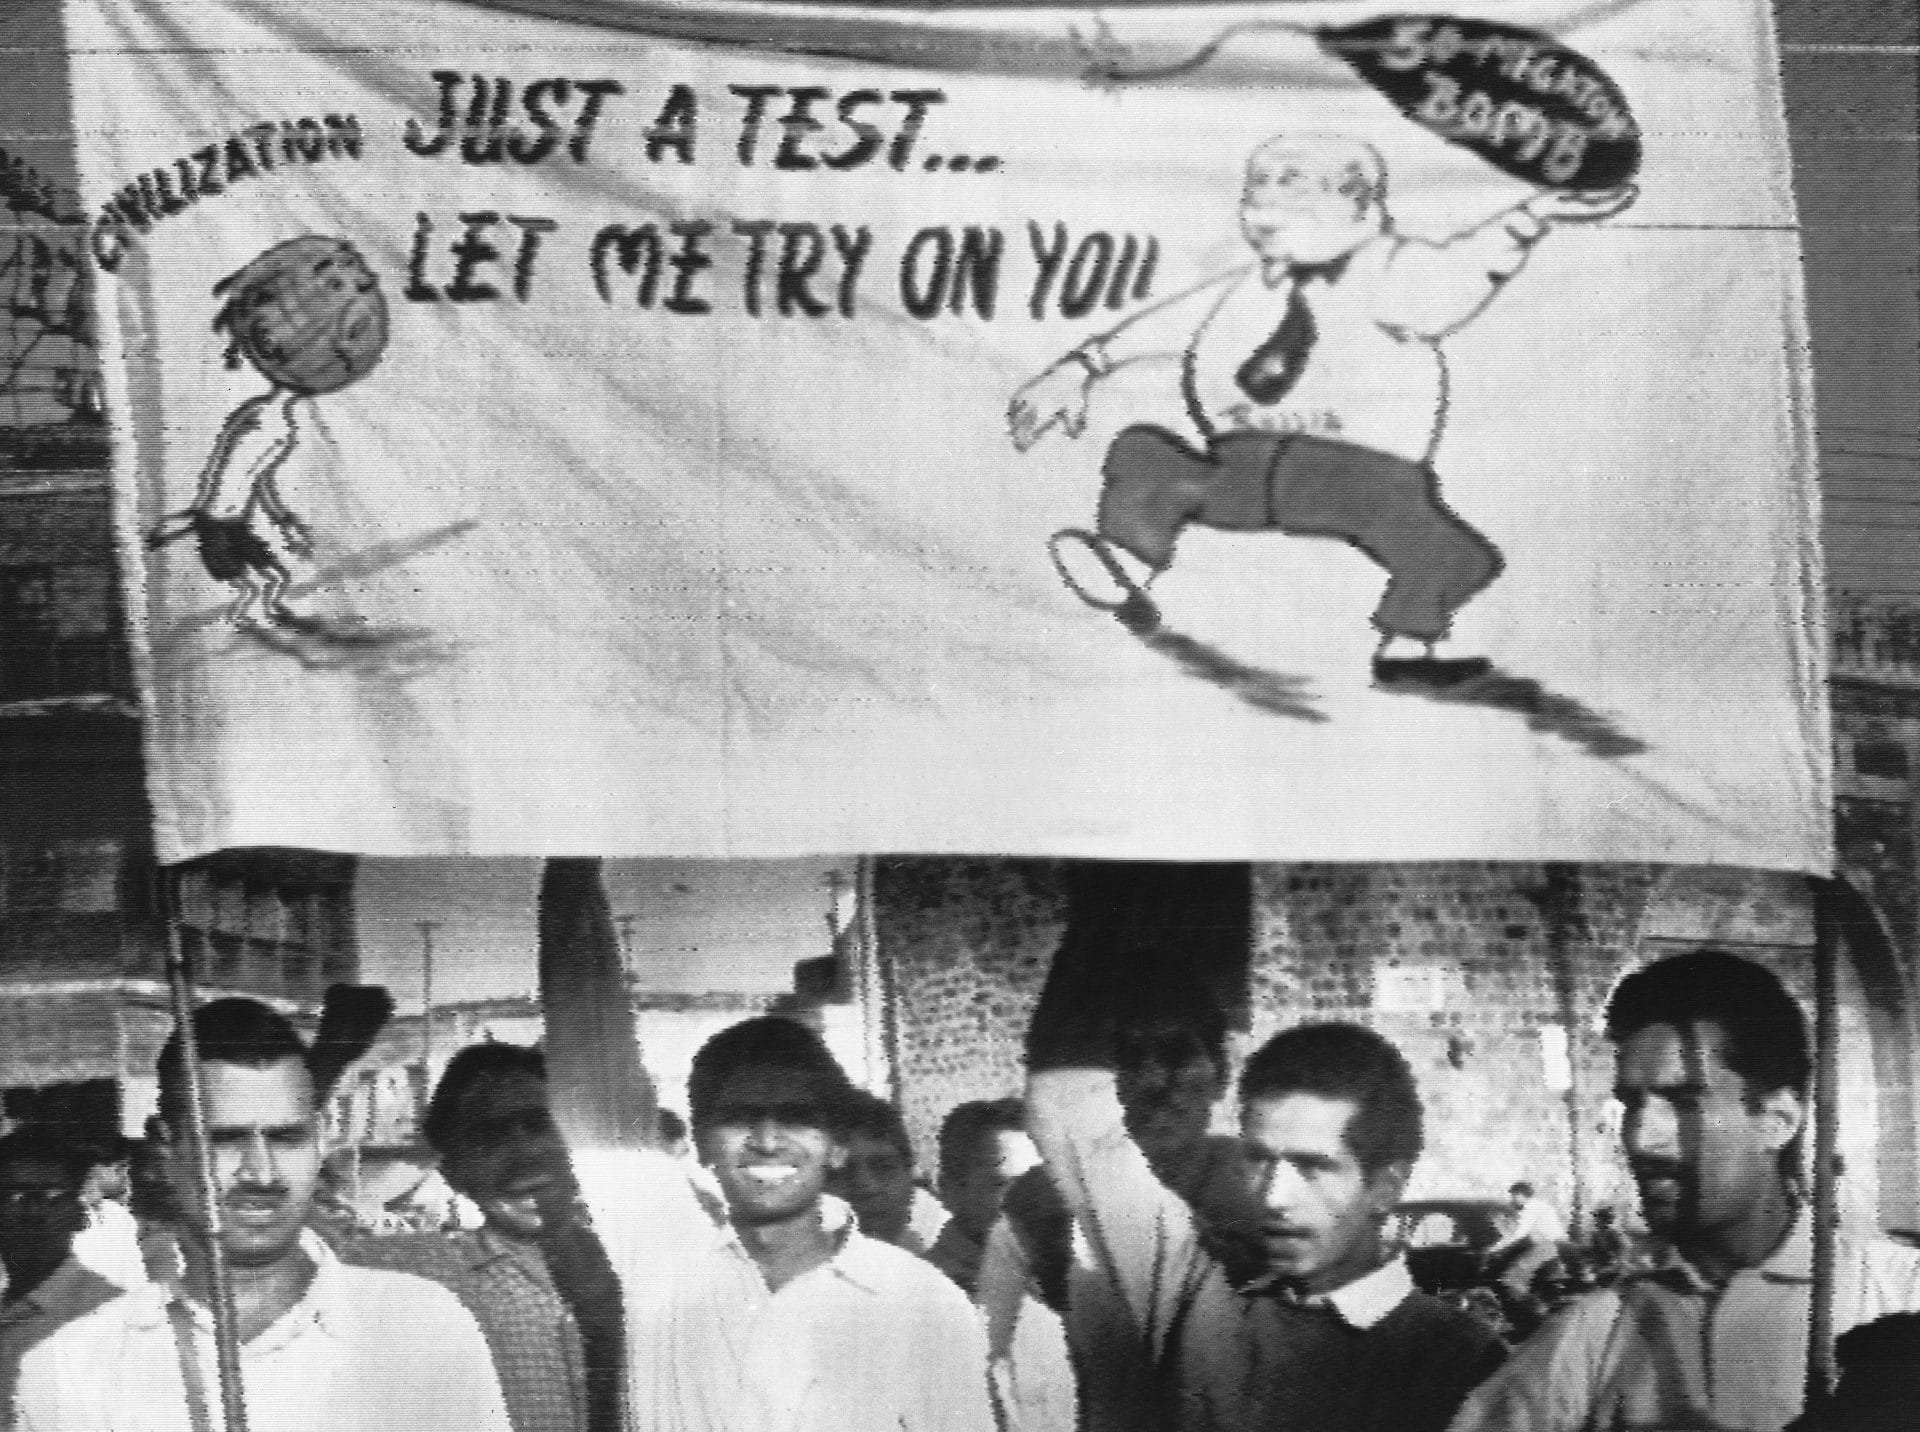 Demonstrators raise a poster during protest processions near the Soviet Embassy in New Delhi, India on November 1, 1961. The poster depicts Soviet Premier Nikita Khrushchev throwing a 50-megaton nuclear bomb on civilization. Lettering reads, "Just a test... let me try on you." (AP Photo)